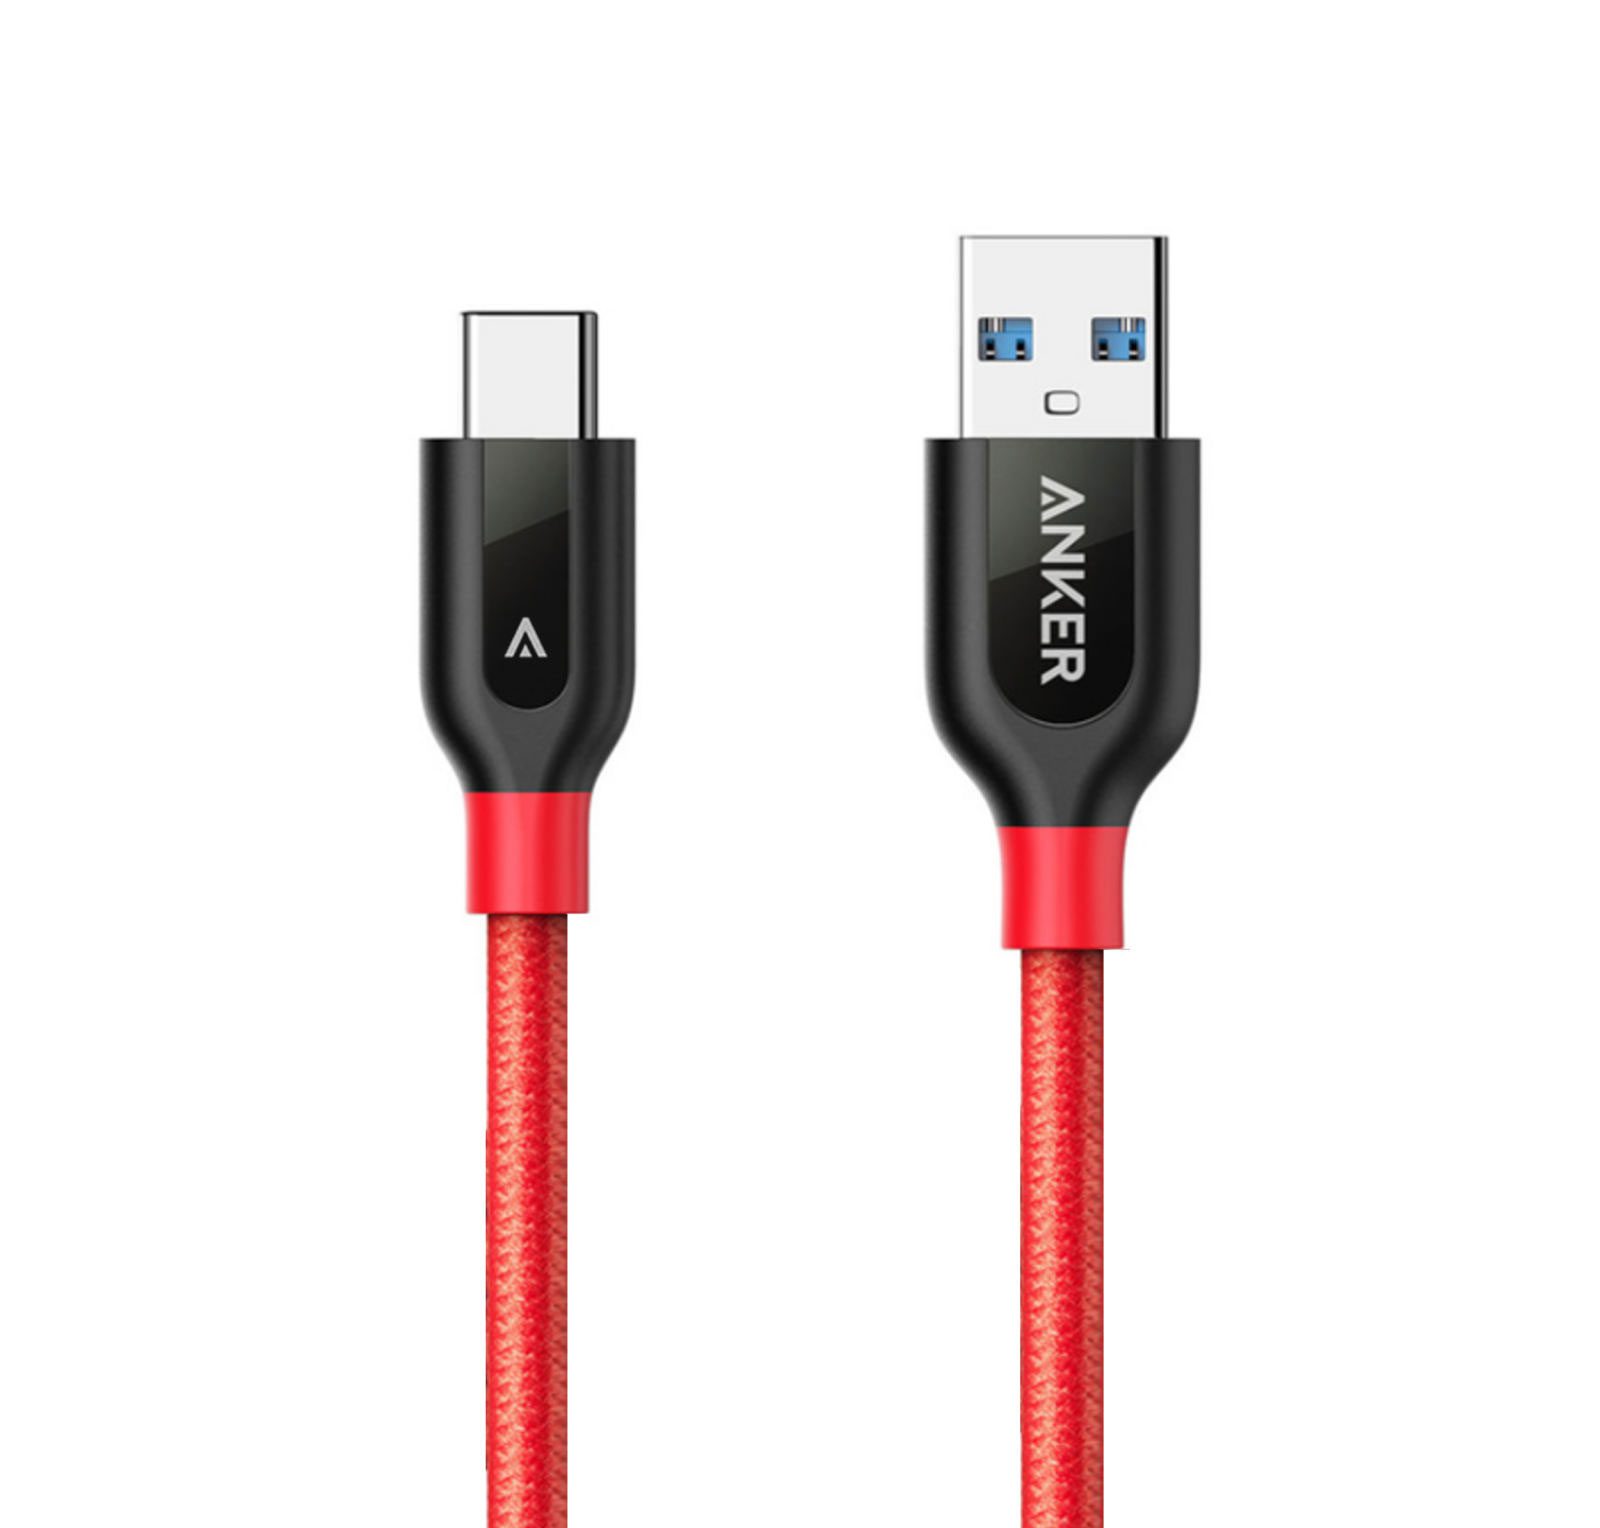 Anker-A8168-PowerLine-Plus-USB-C-To-USB-Cable-0.9m.from-binobuyo-01